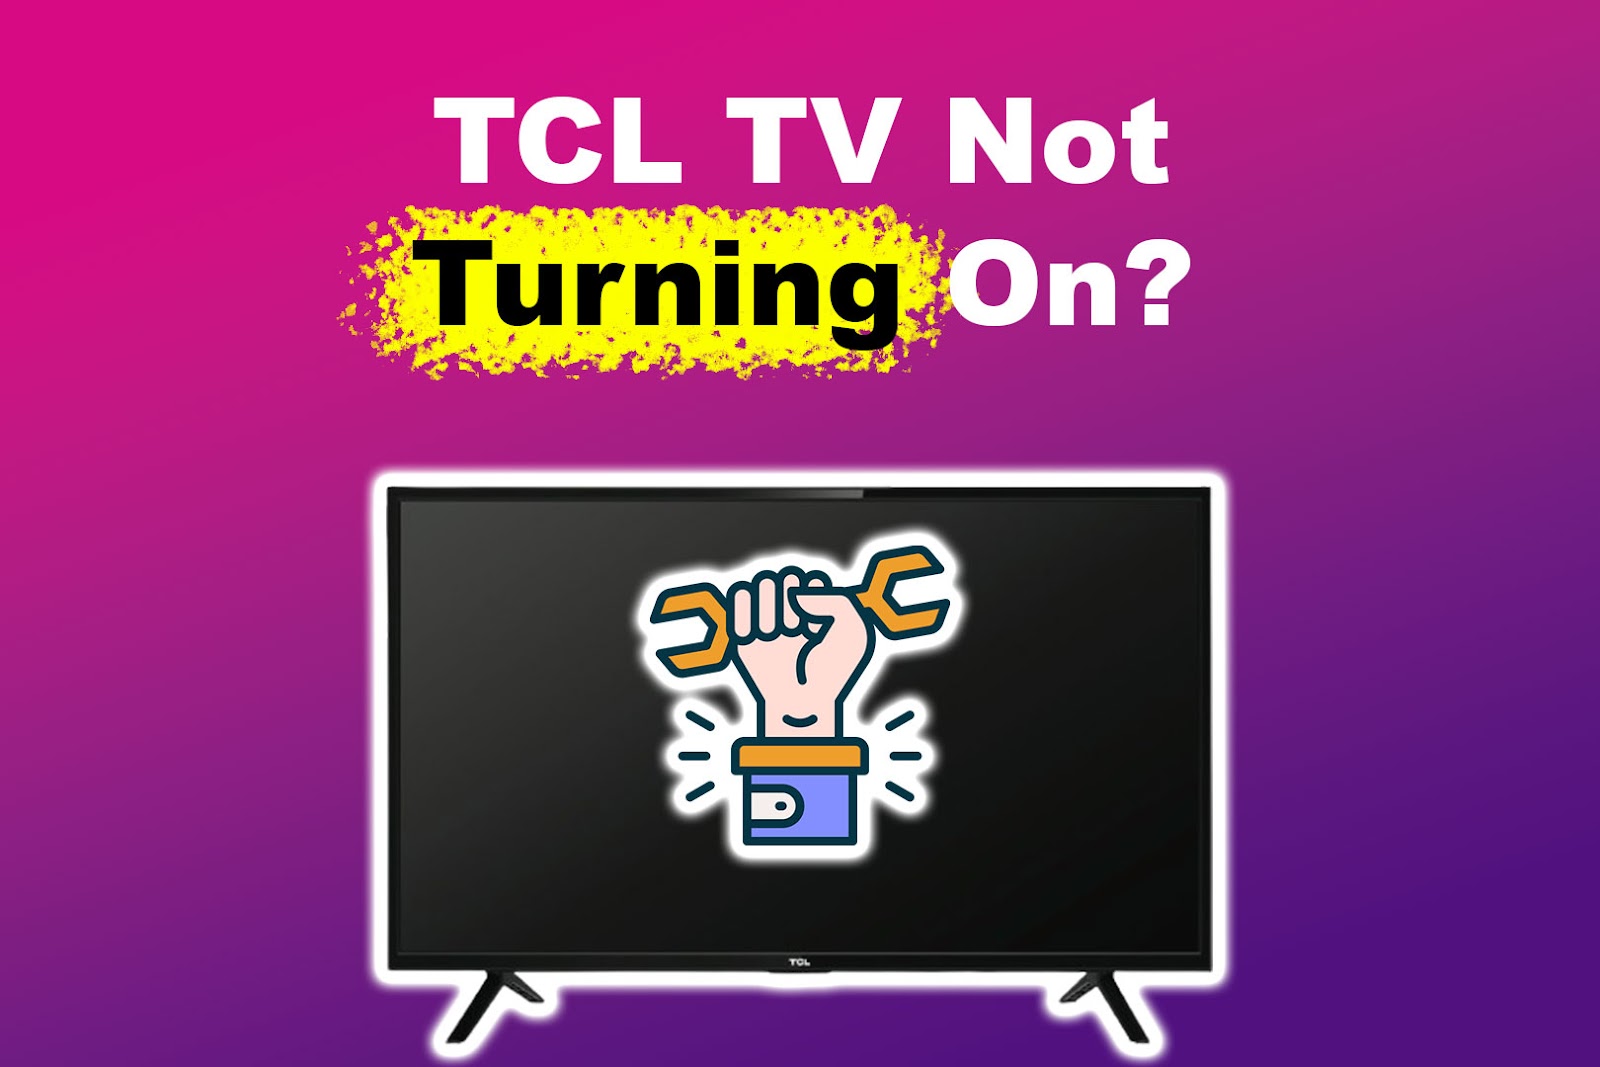 TCL TV Won’t Turn On? Find How to Fix It Here!